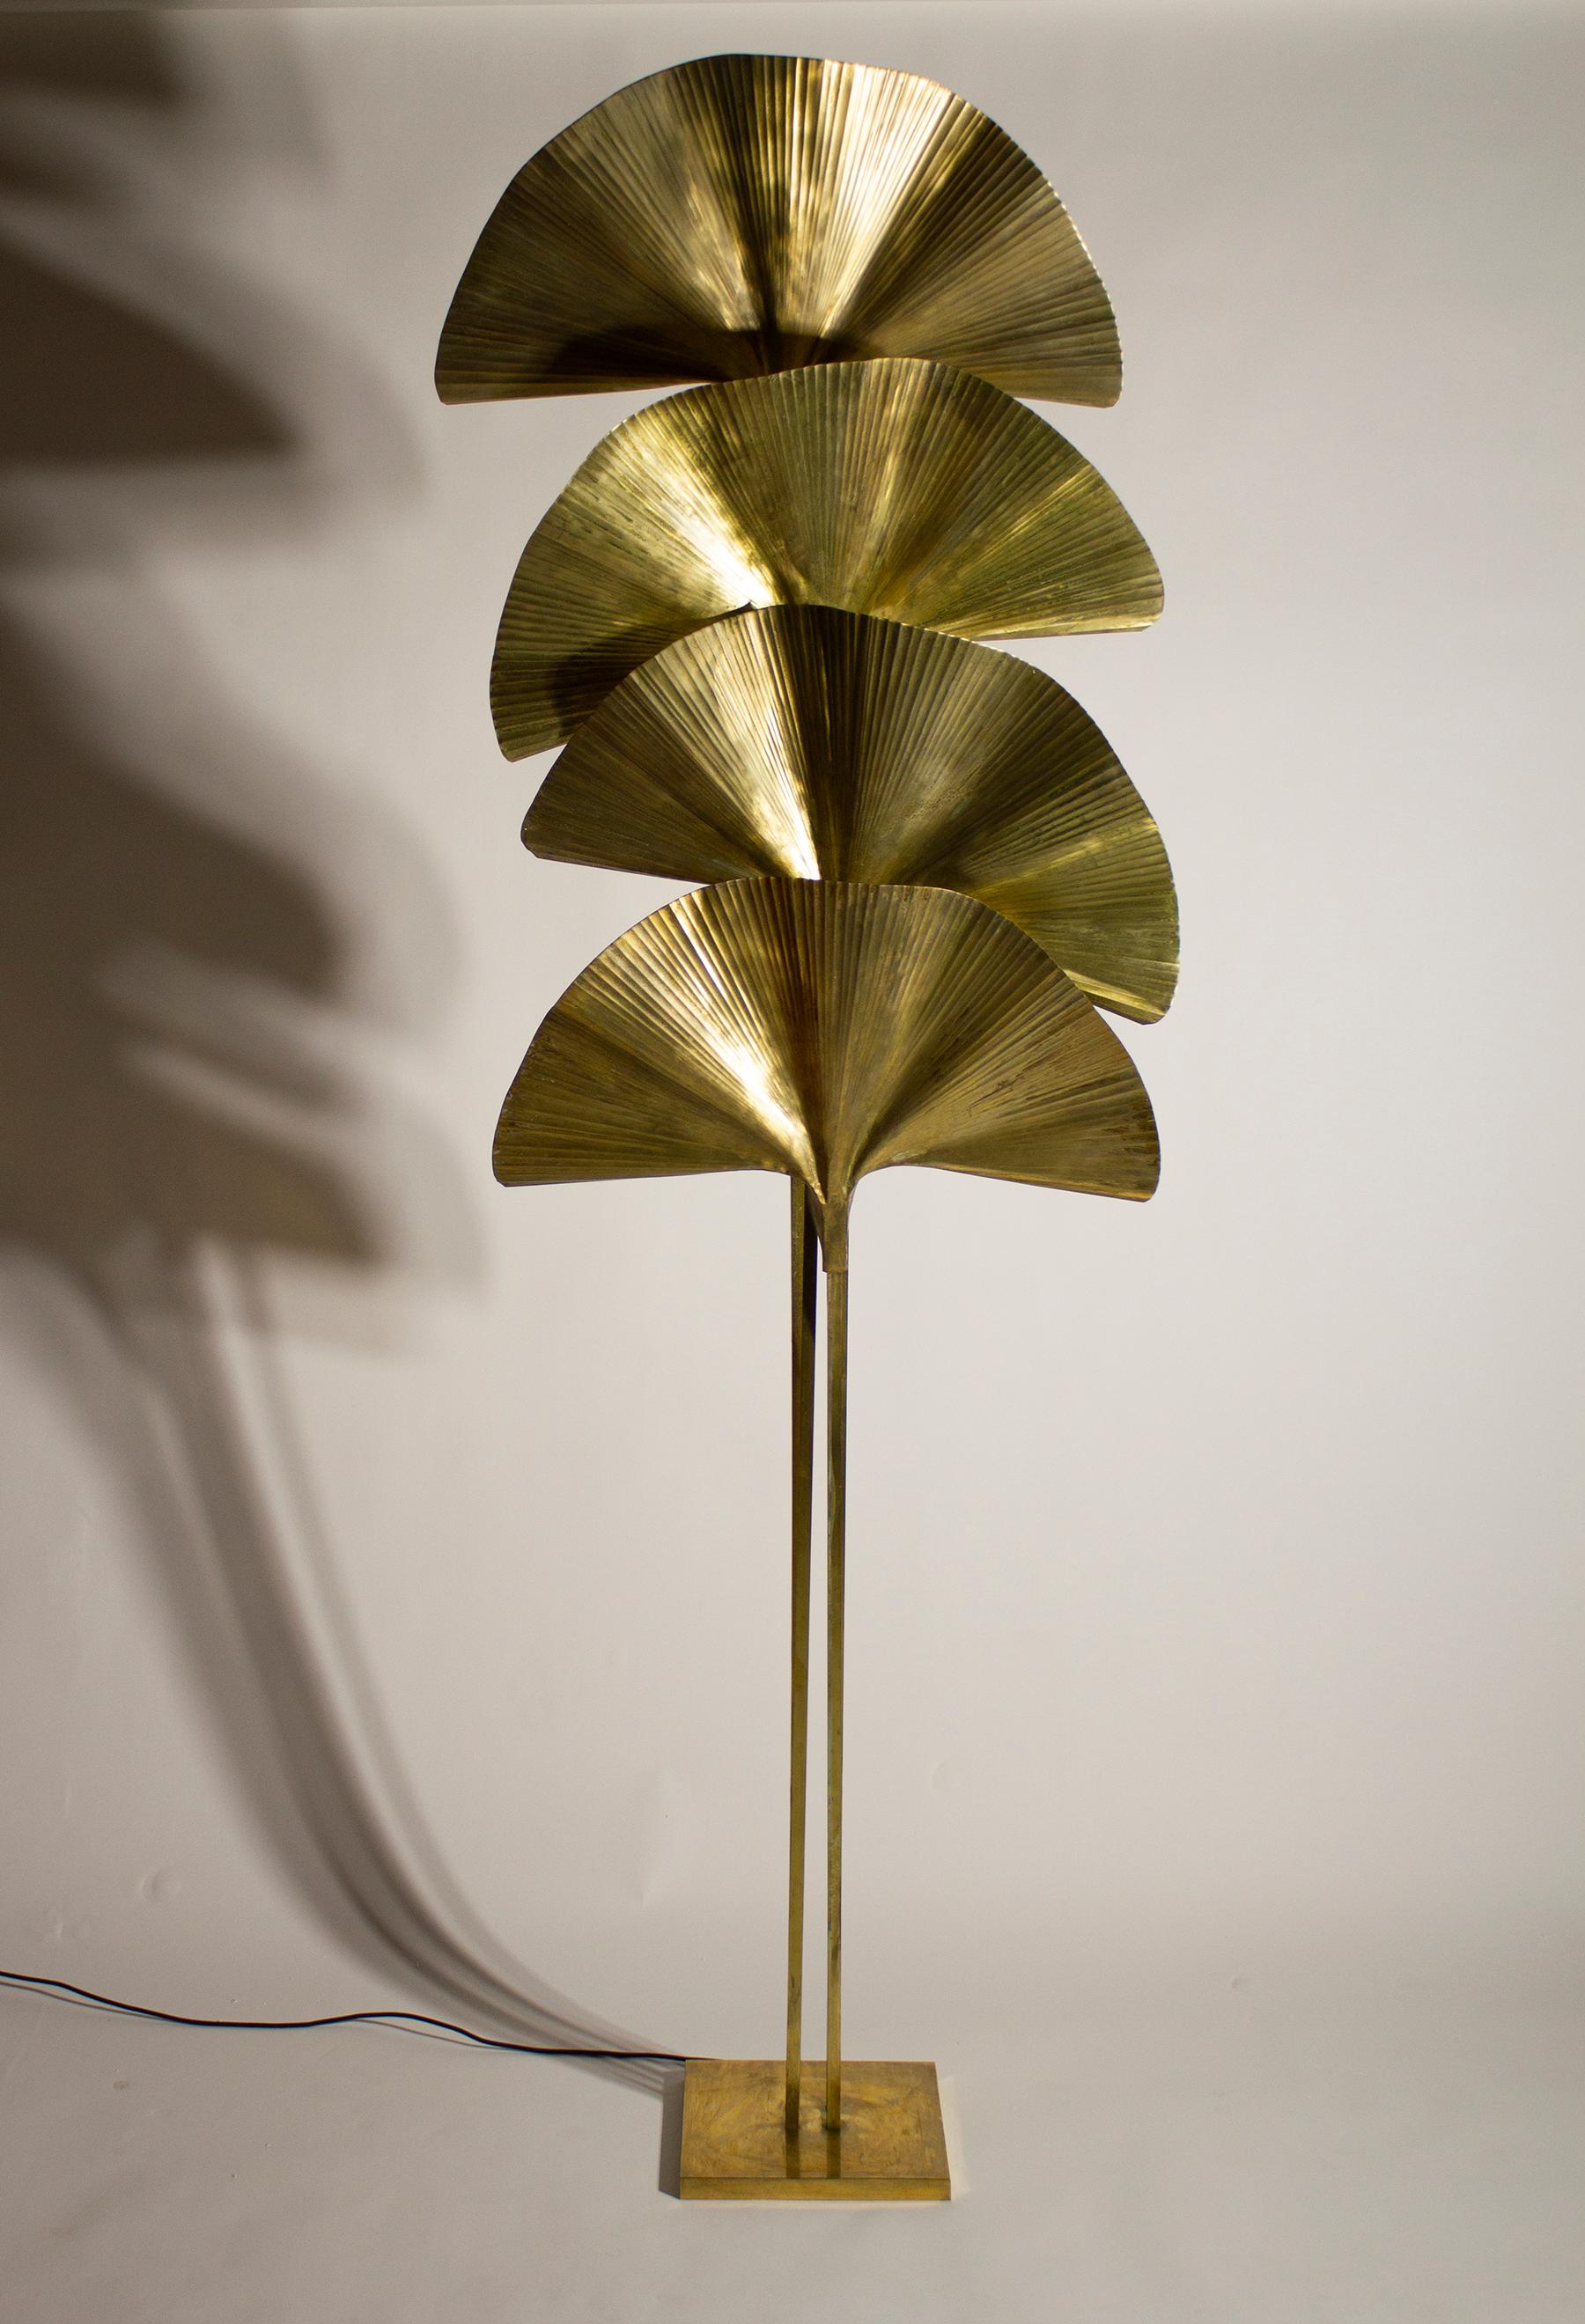 Monumental floor lamp in an organic Ginko leaf constructed in brass. Designed by Italian designer Tommaso Barbi, Italy, 1970s.